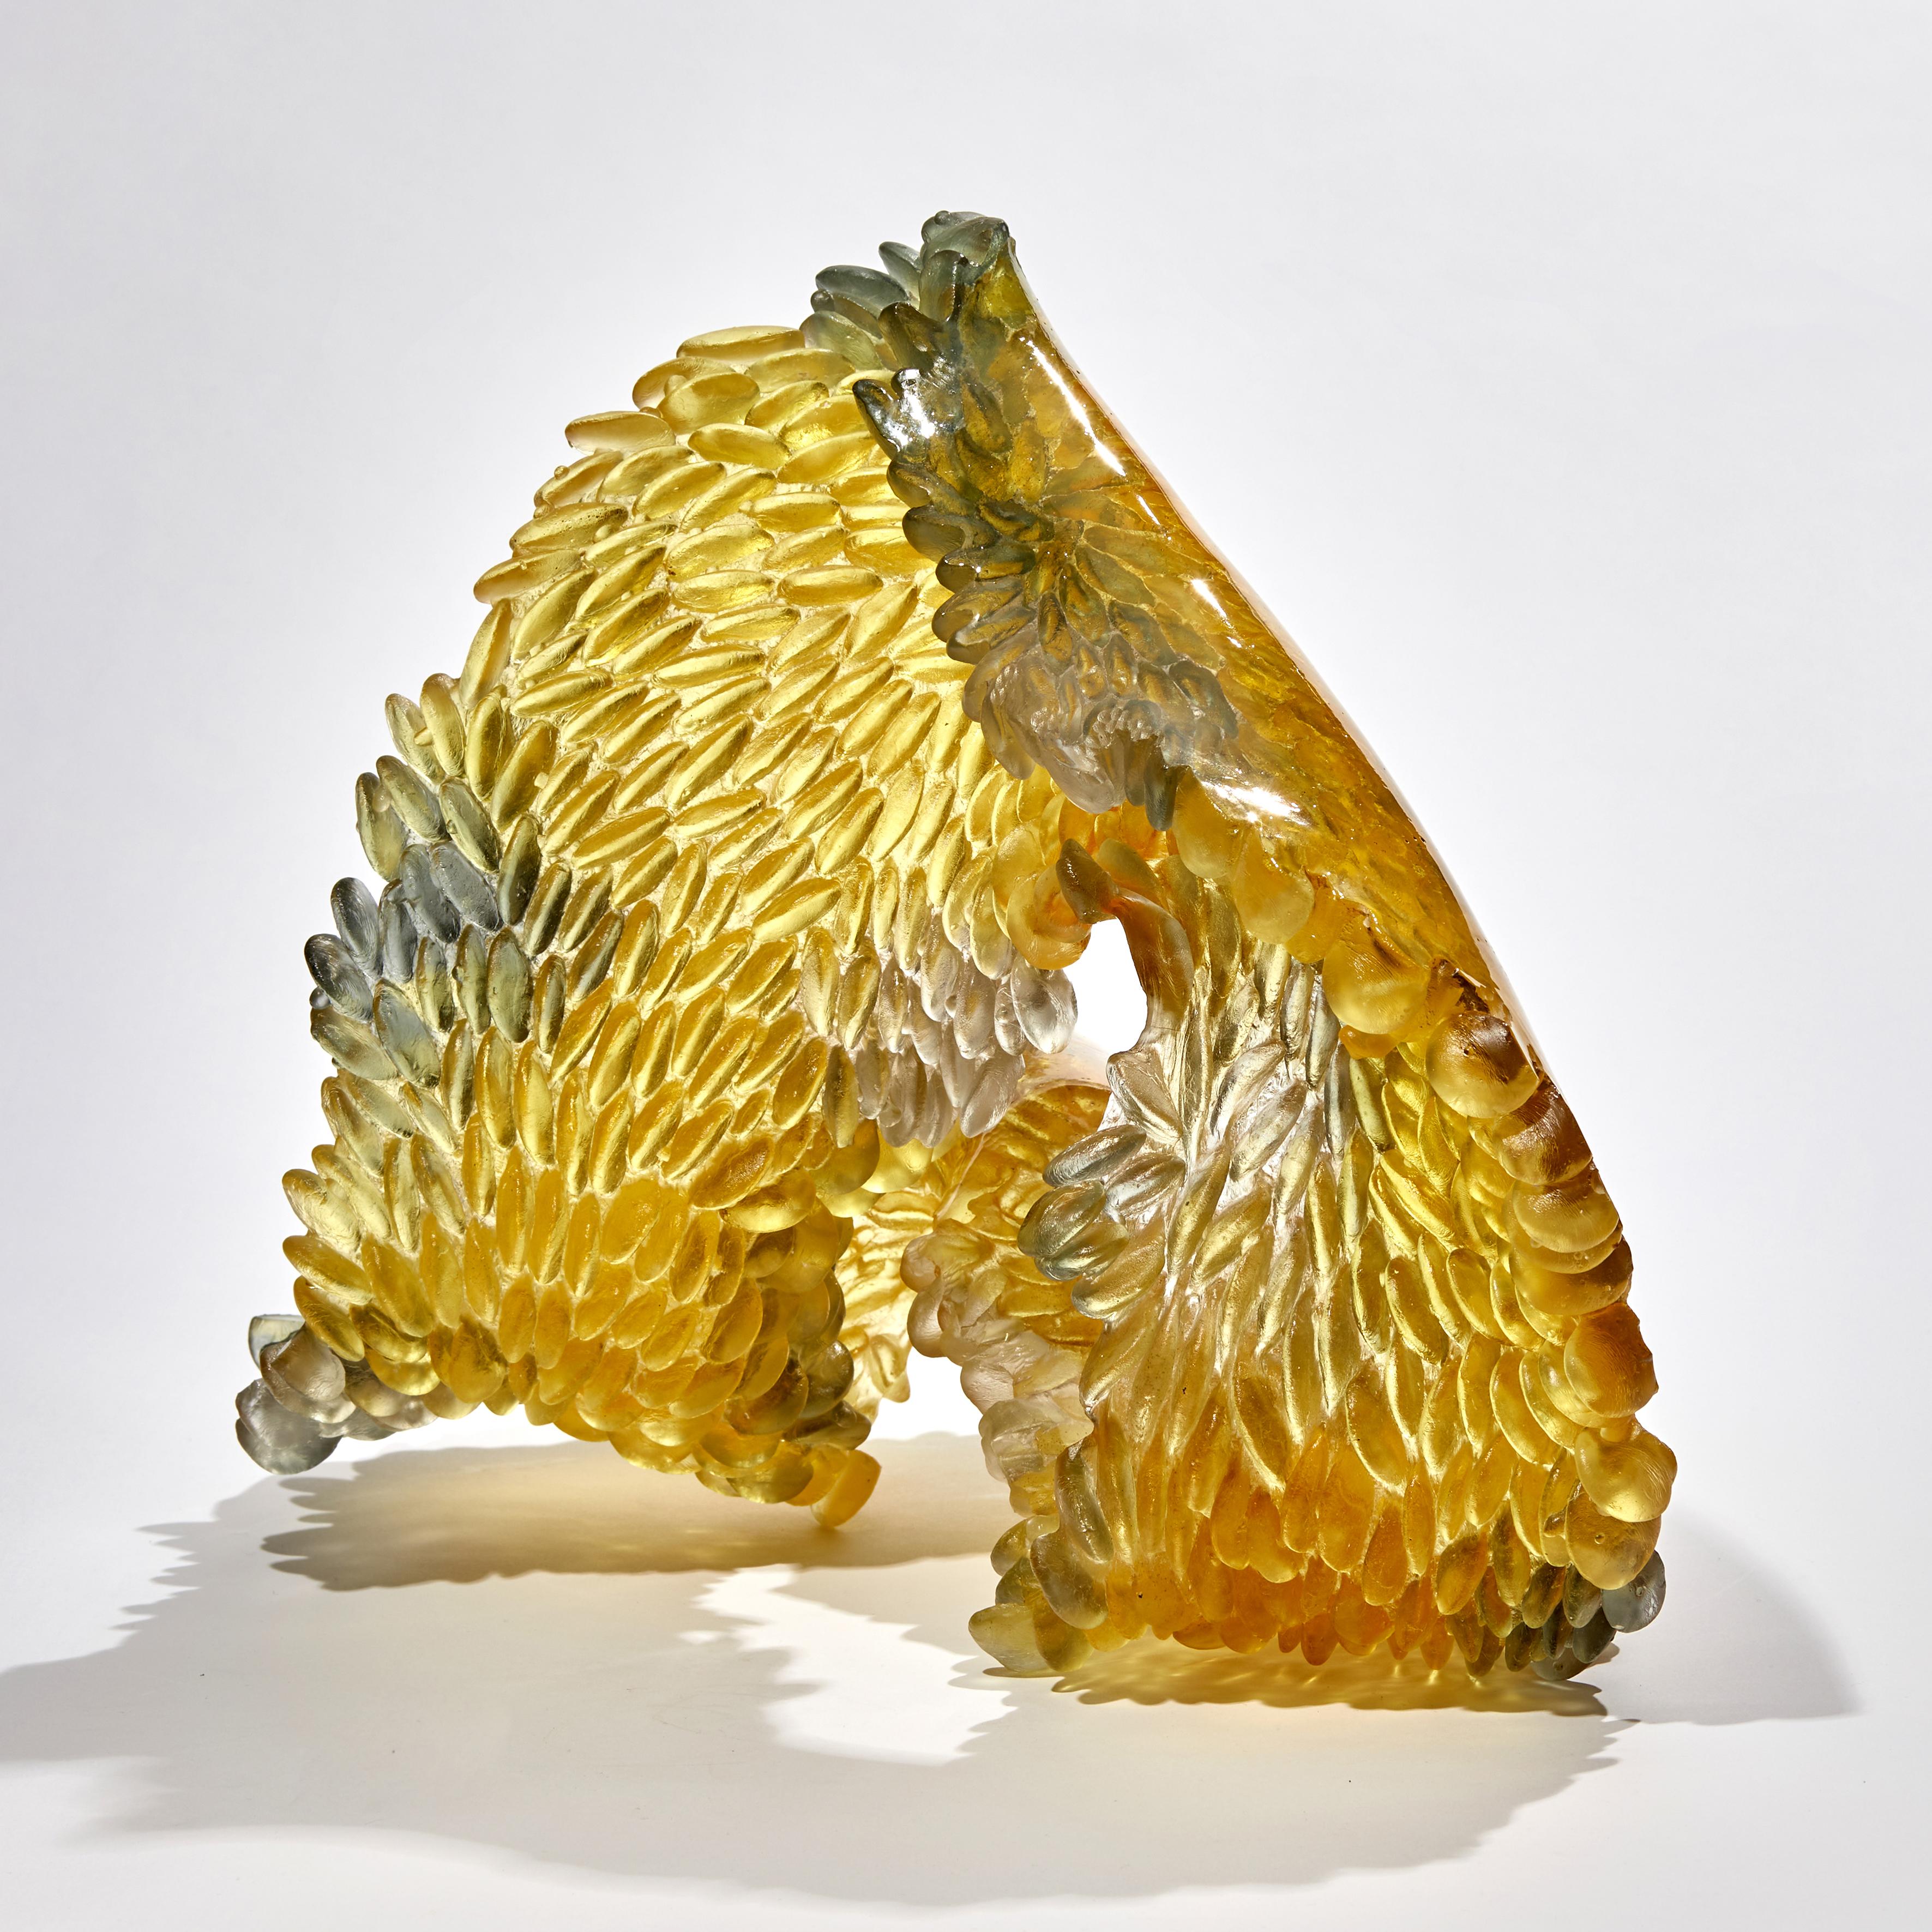 Organic Modern Infinity, a Unique Glass Sculpture in Amber, Gold & Grey by Nina Casson McGarva